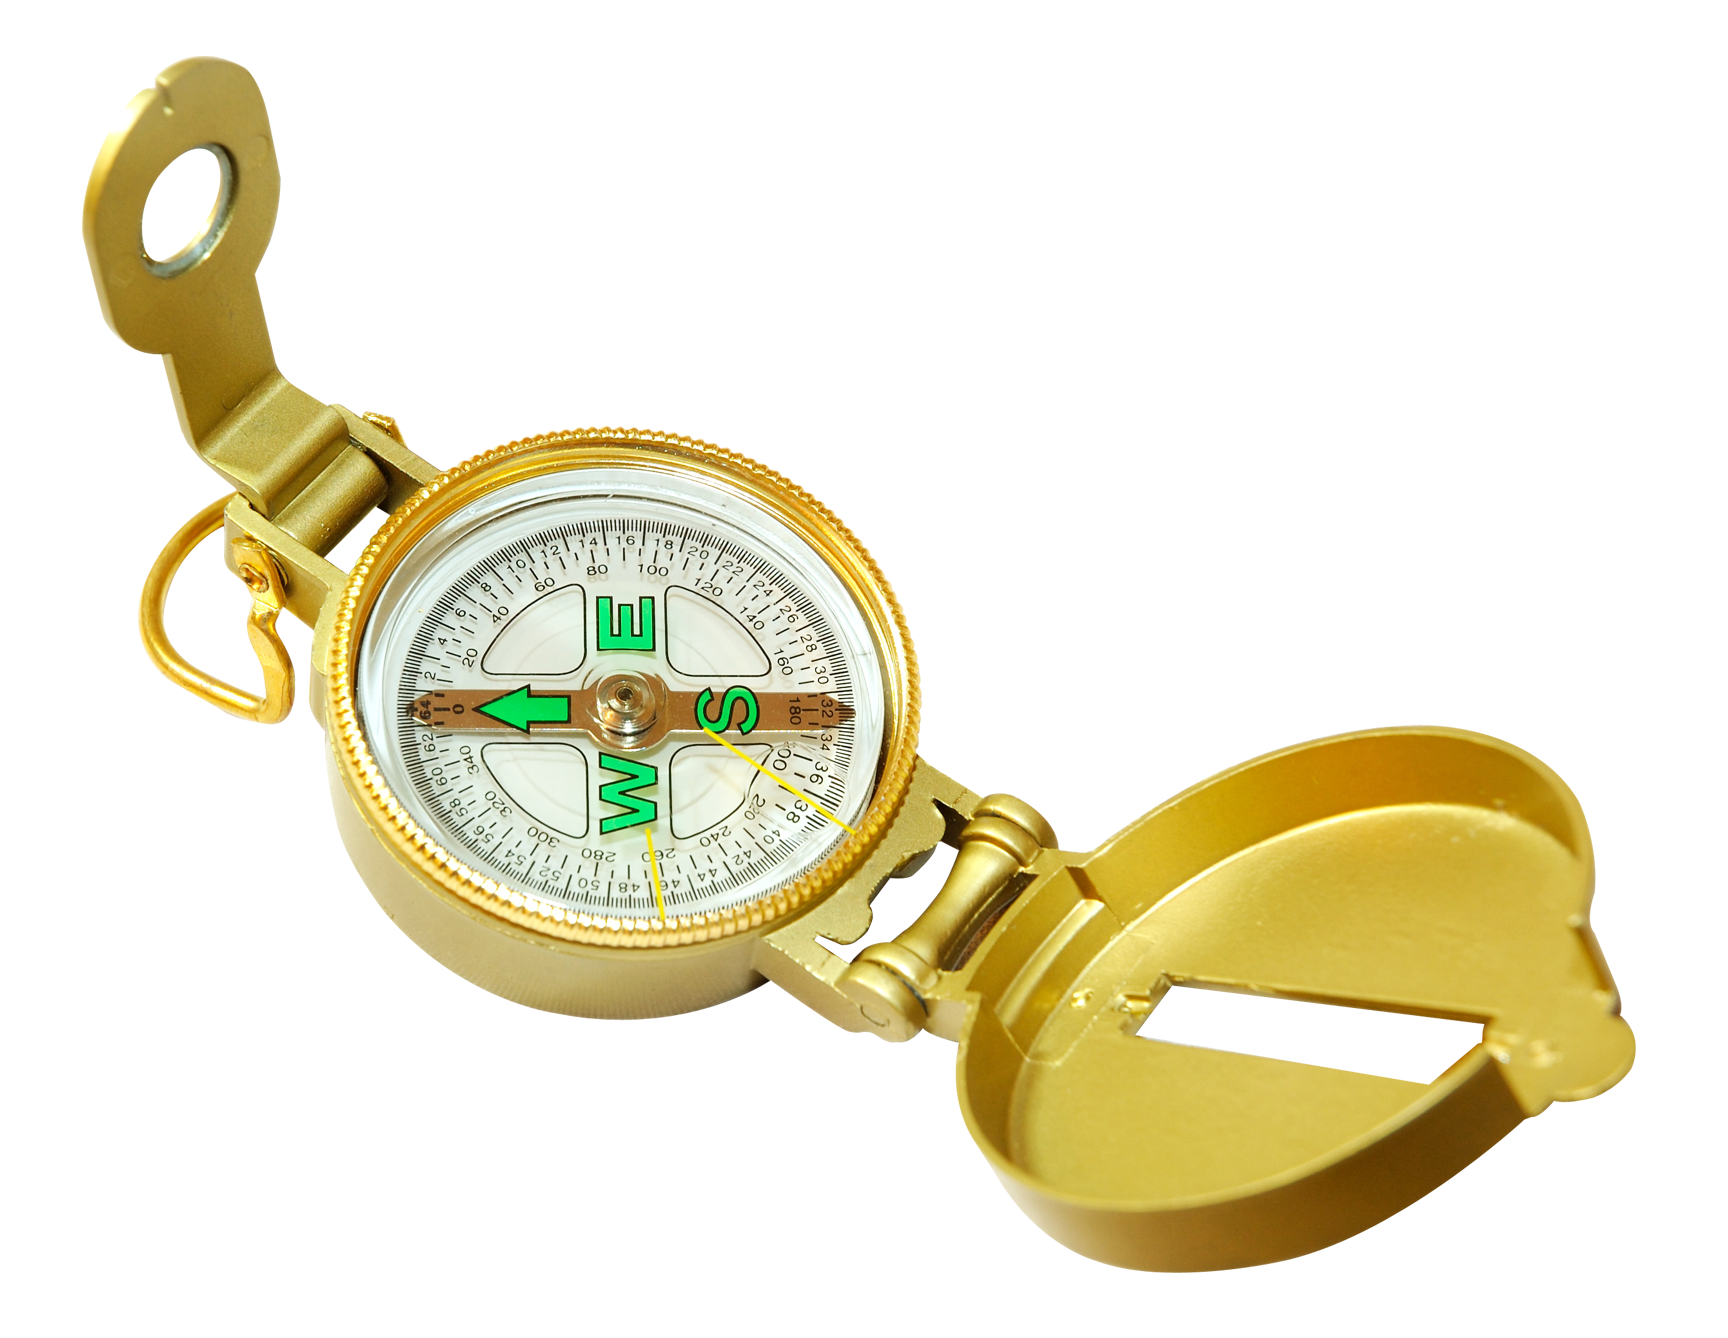 A Gold Compass With A Black Background